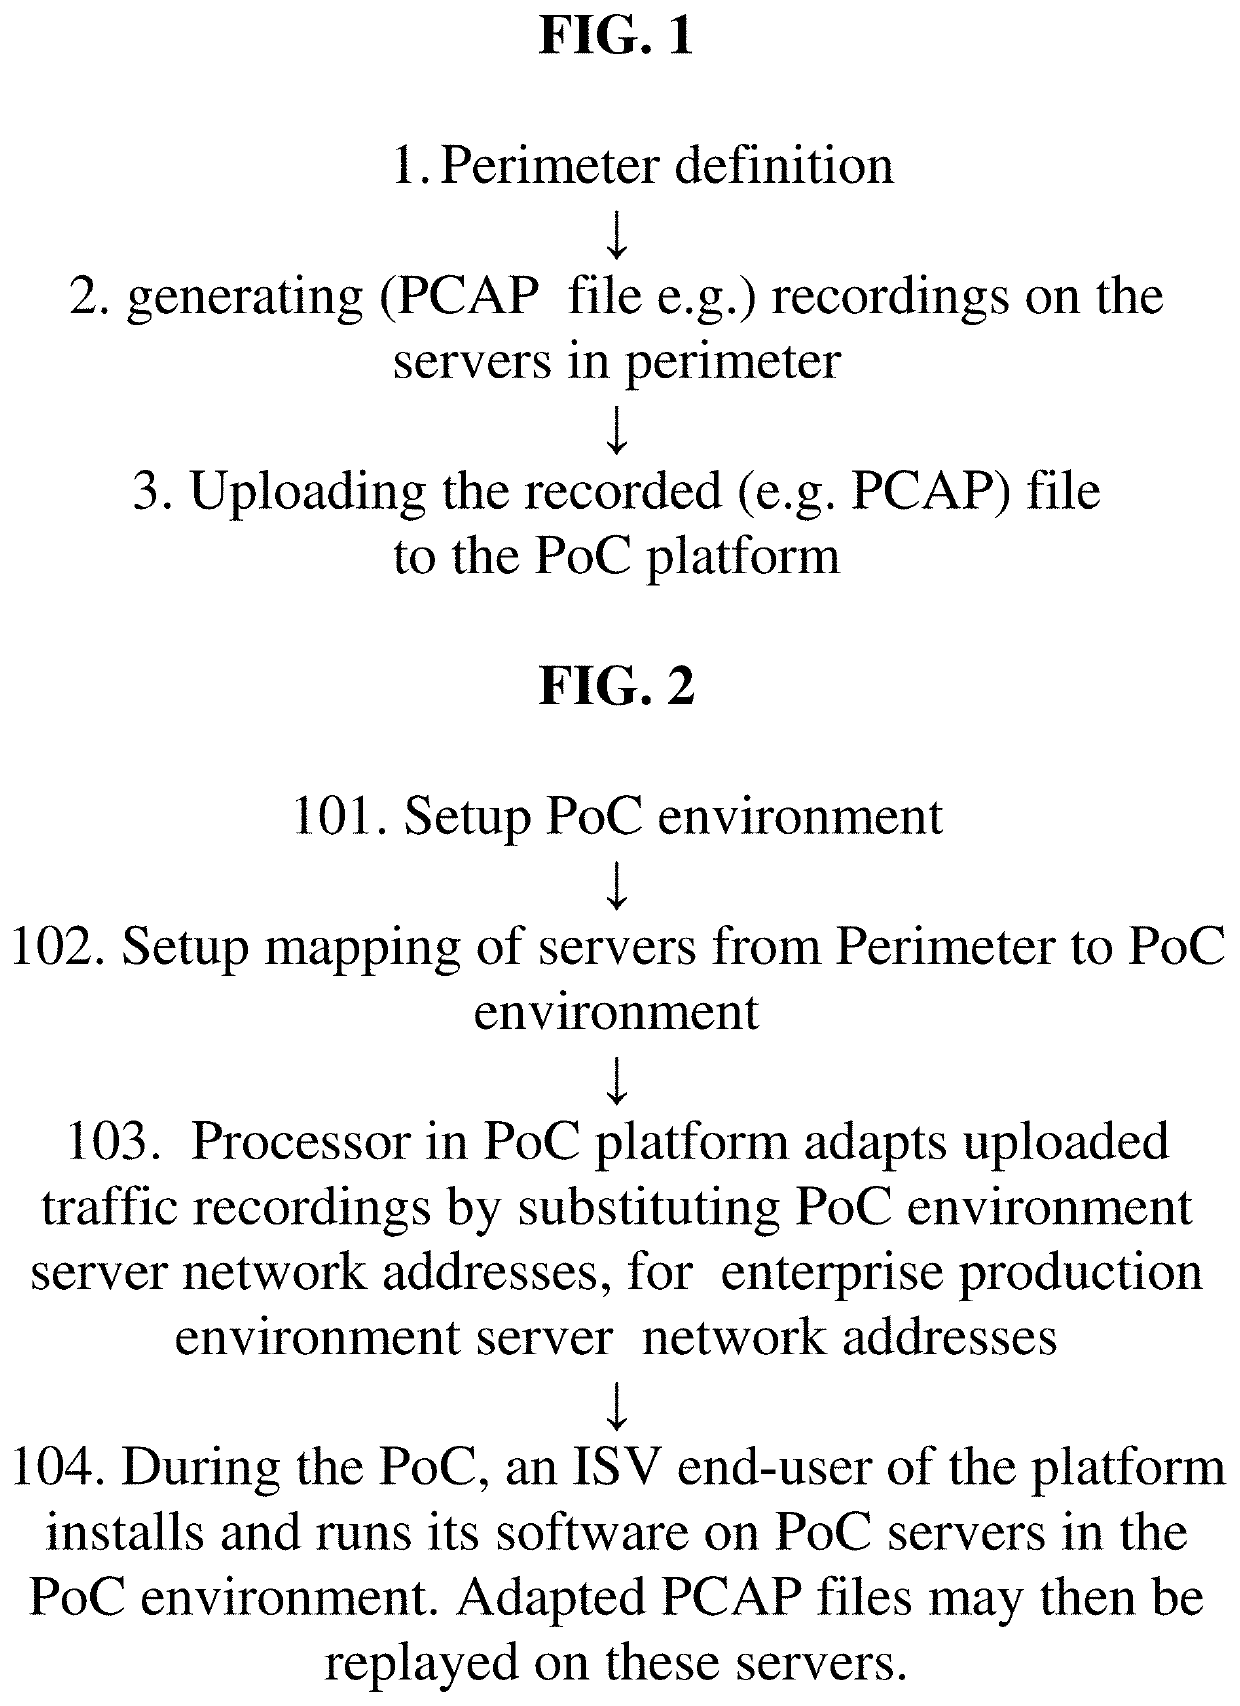 System, computer program product and method for enhanced production environment behavior mirroring e.g. while conducting pilot on proof-of-concept (POC) platforms